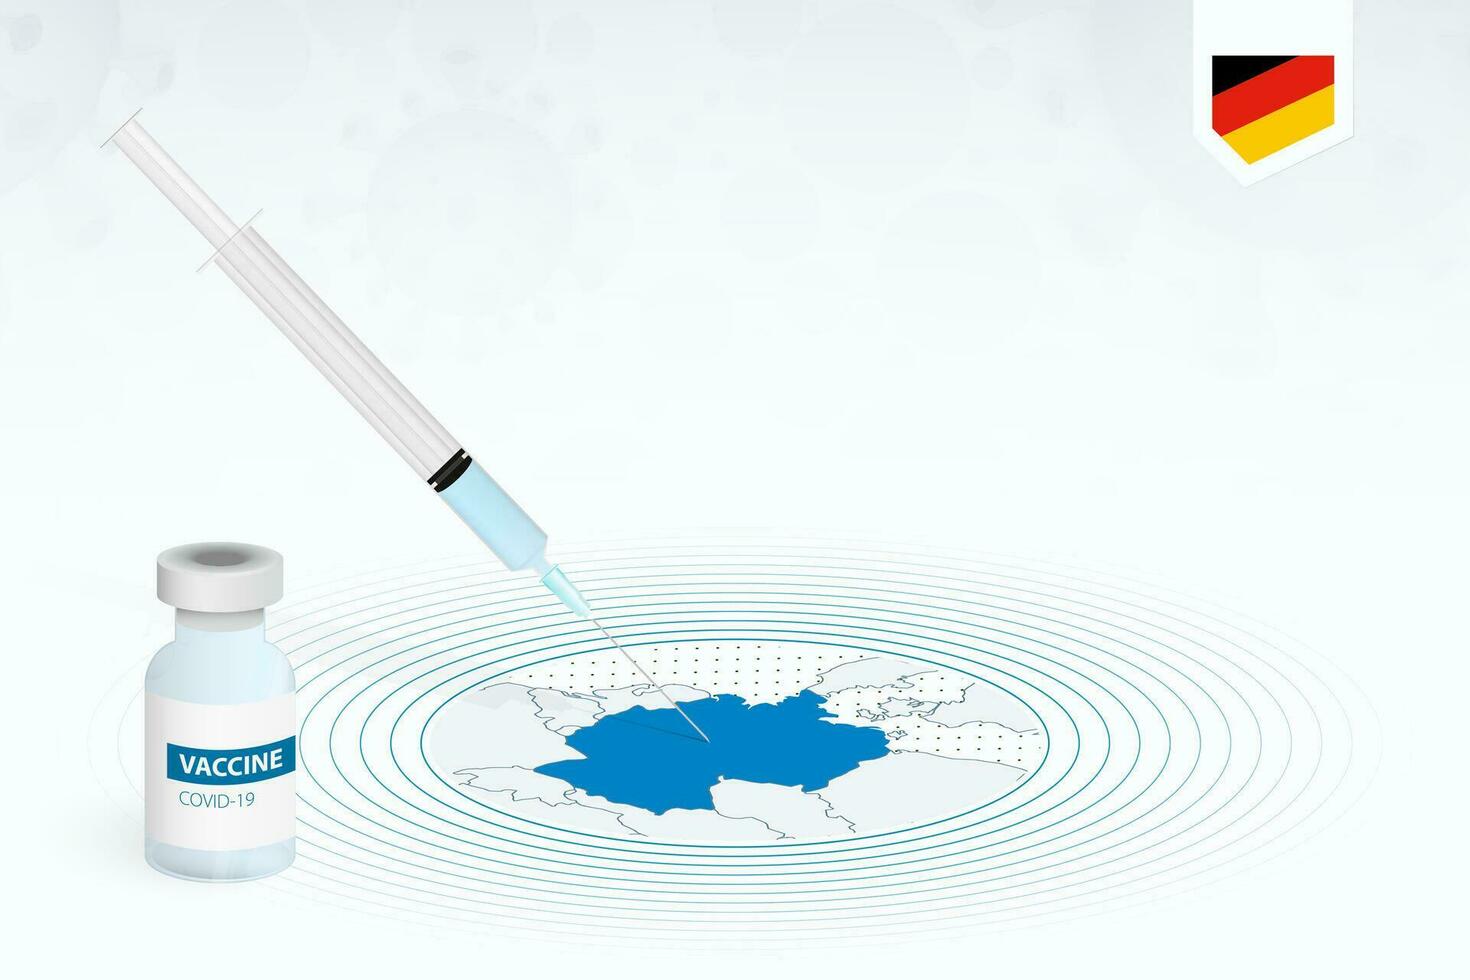 COVID-19 vaccination in Germany, coronavirus vaccination illustration with vaccine bottle and syringe injection in map of Germany. vector